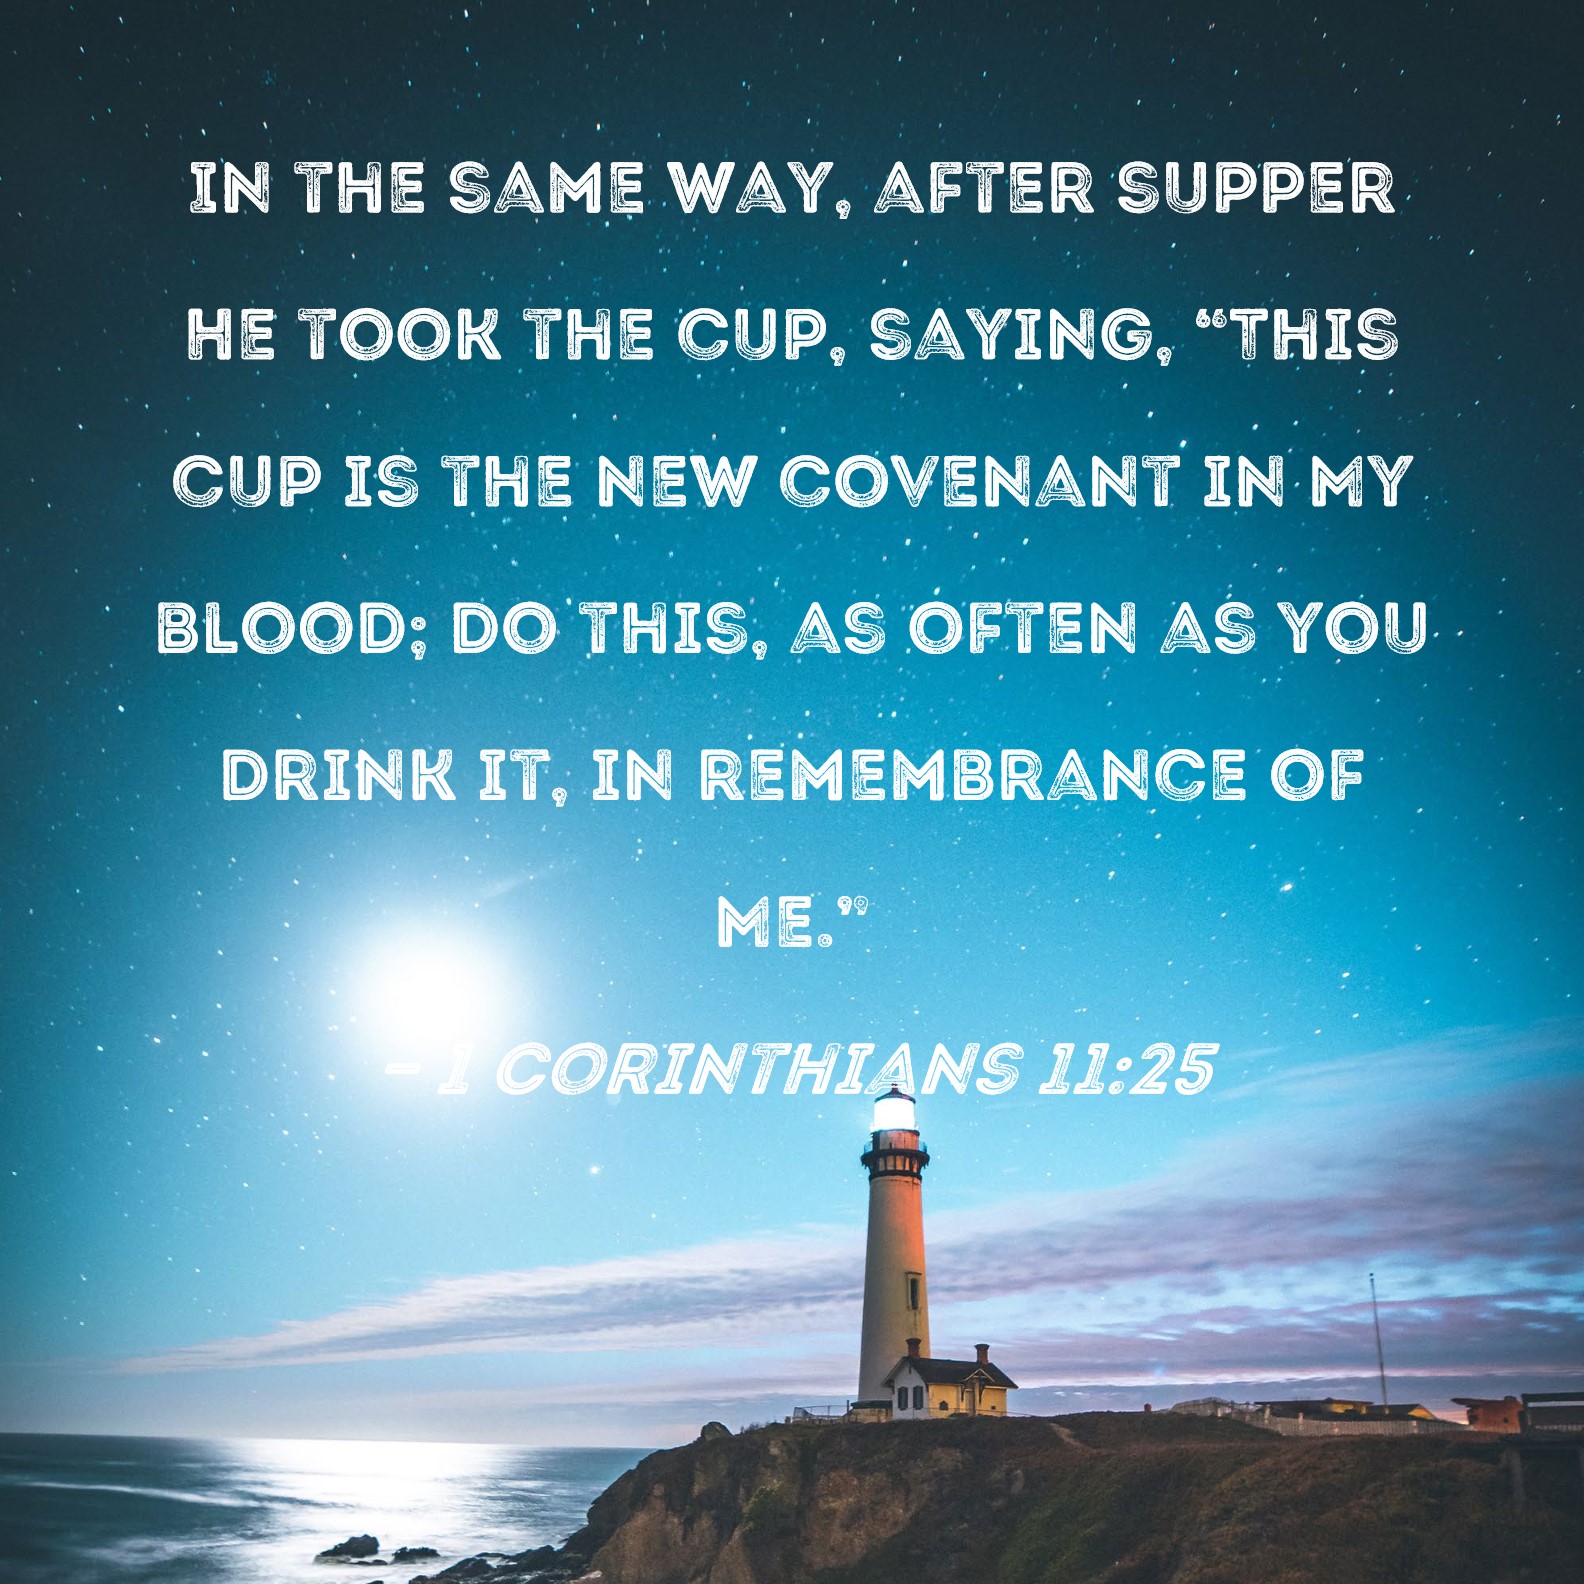 1-corinthians-11-25-in-the-same-way-after-supper-he-took-the-cup-saying-this-cup-is-the-new